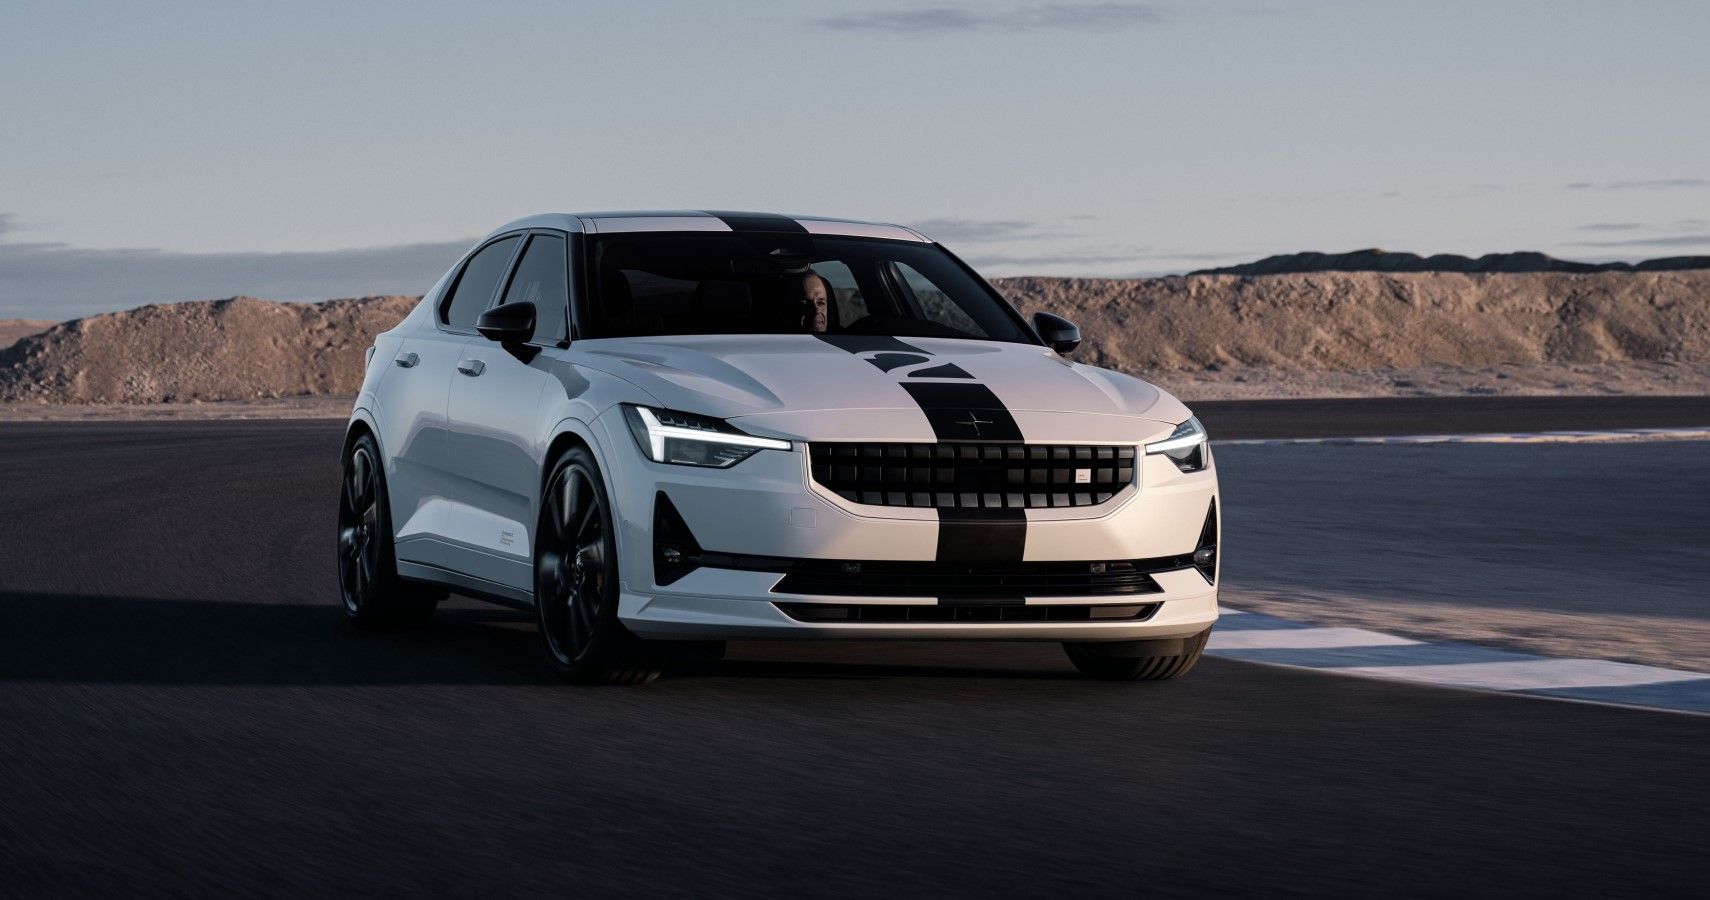 Polestar 2 BST Edition 270 front third quarter view on track